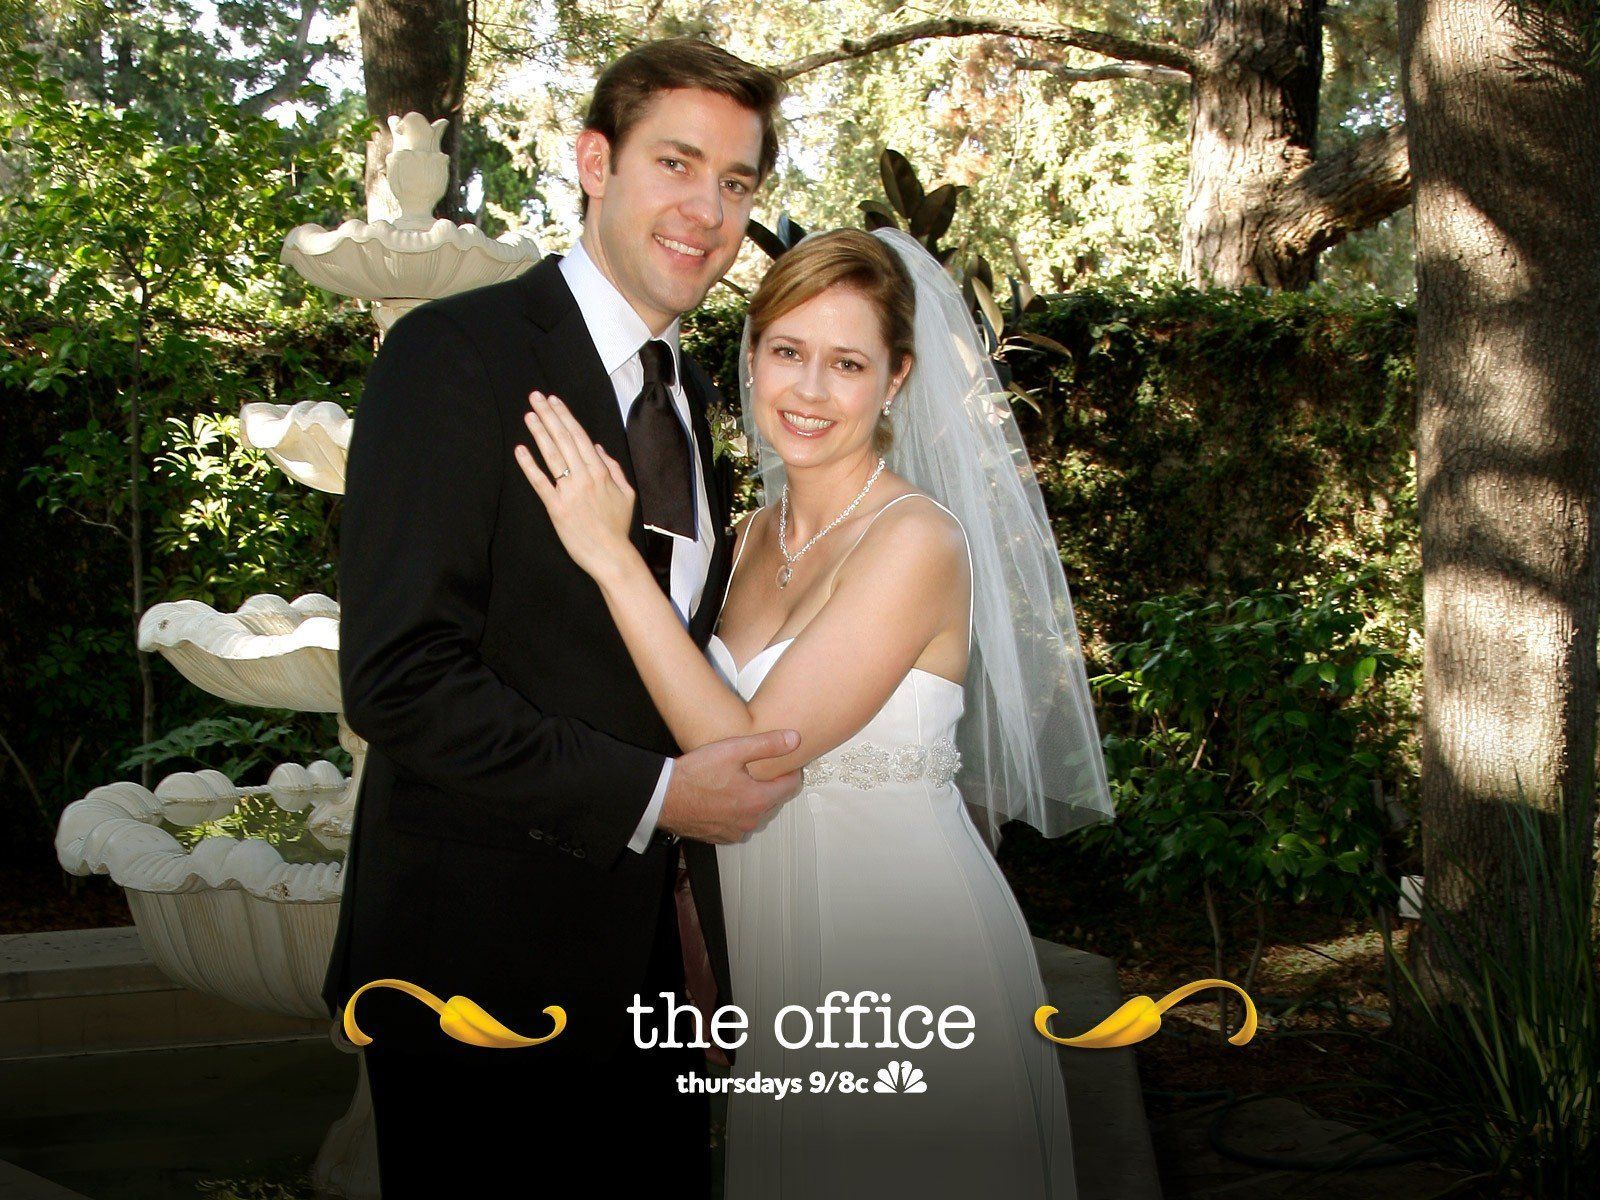 picture from tv show the office. The Office Wallpaper - (1280x1024). Desktop Download page. Office wallpaper, The office wedding, The office